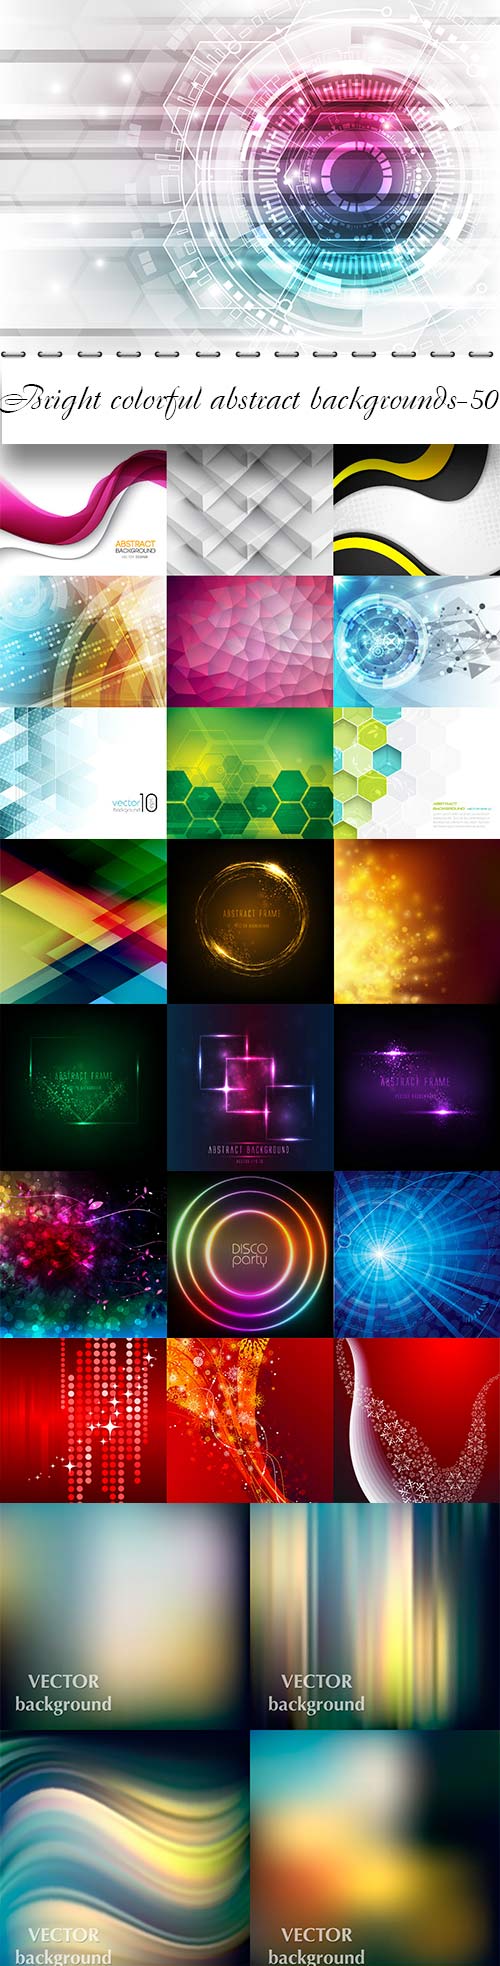 Bright colorful abstract backgrounds vector -51